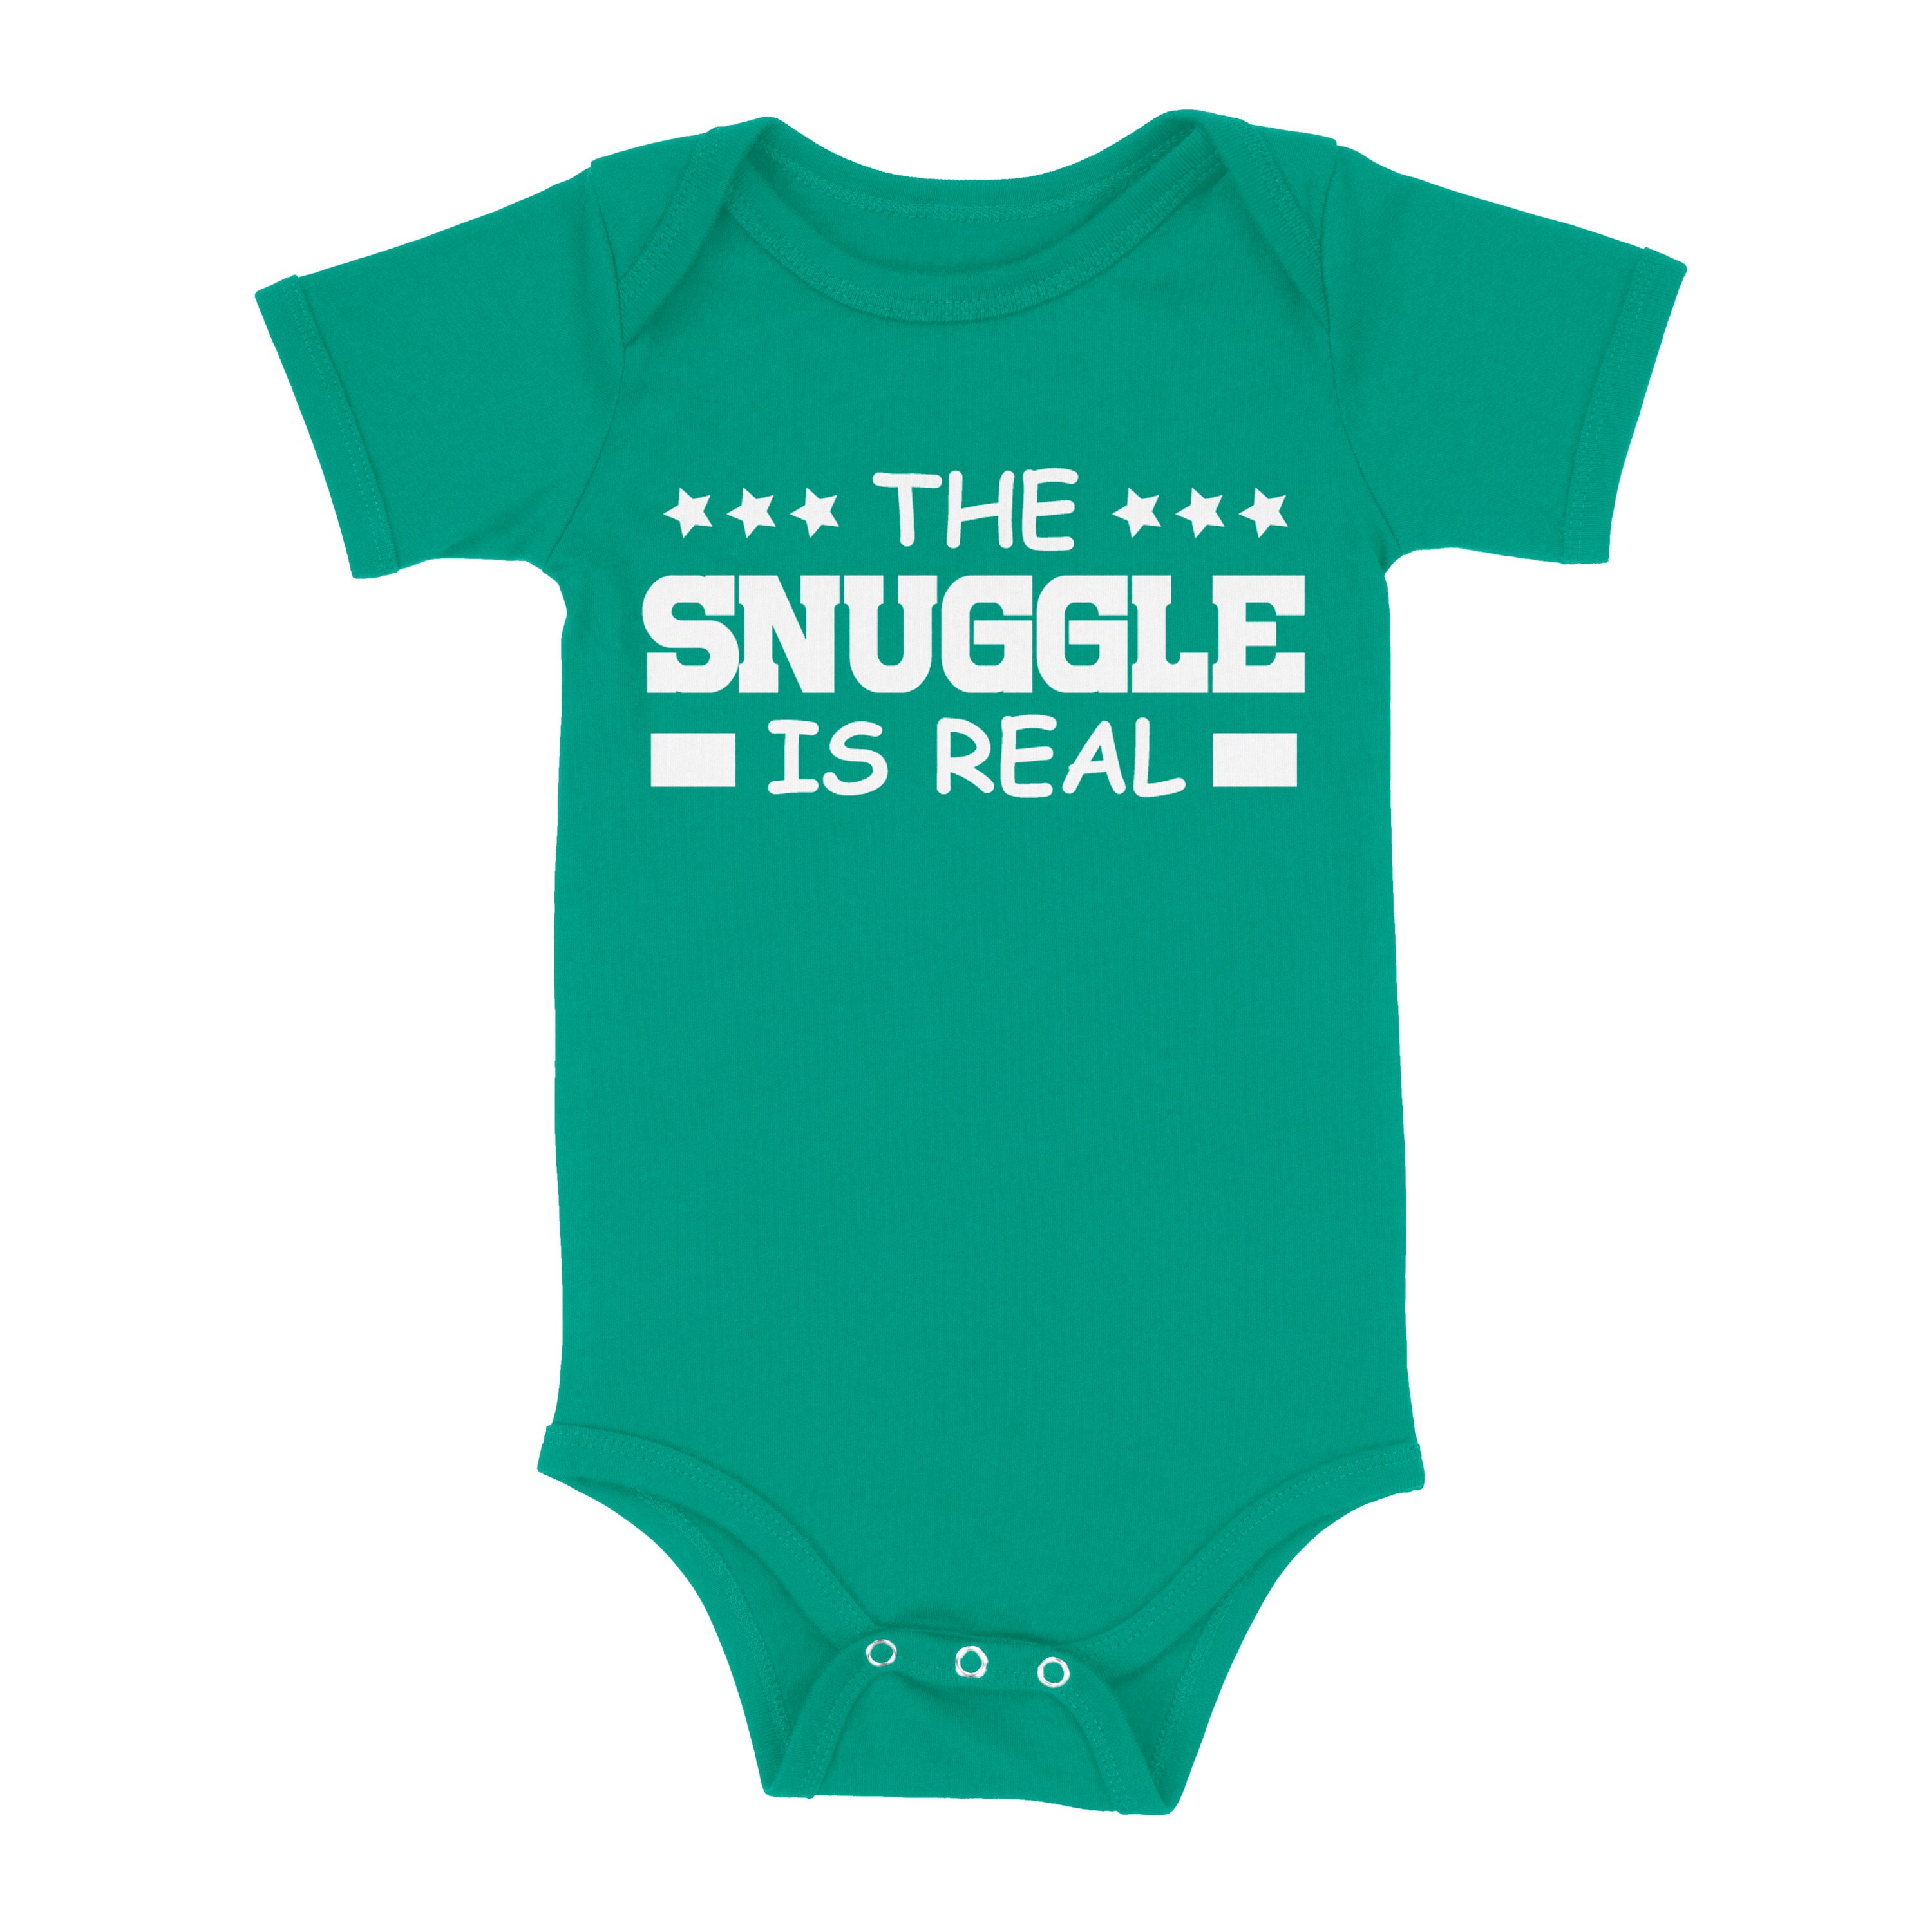 cuddle cute boy love Baby grow BABY VEST / Bodysuit THE SNUGGLE IS REAL funny 